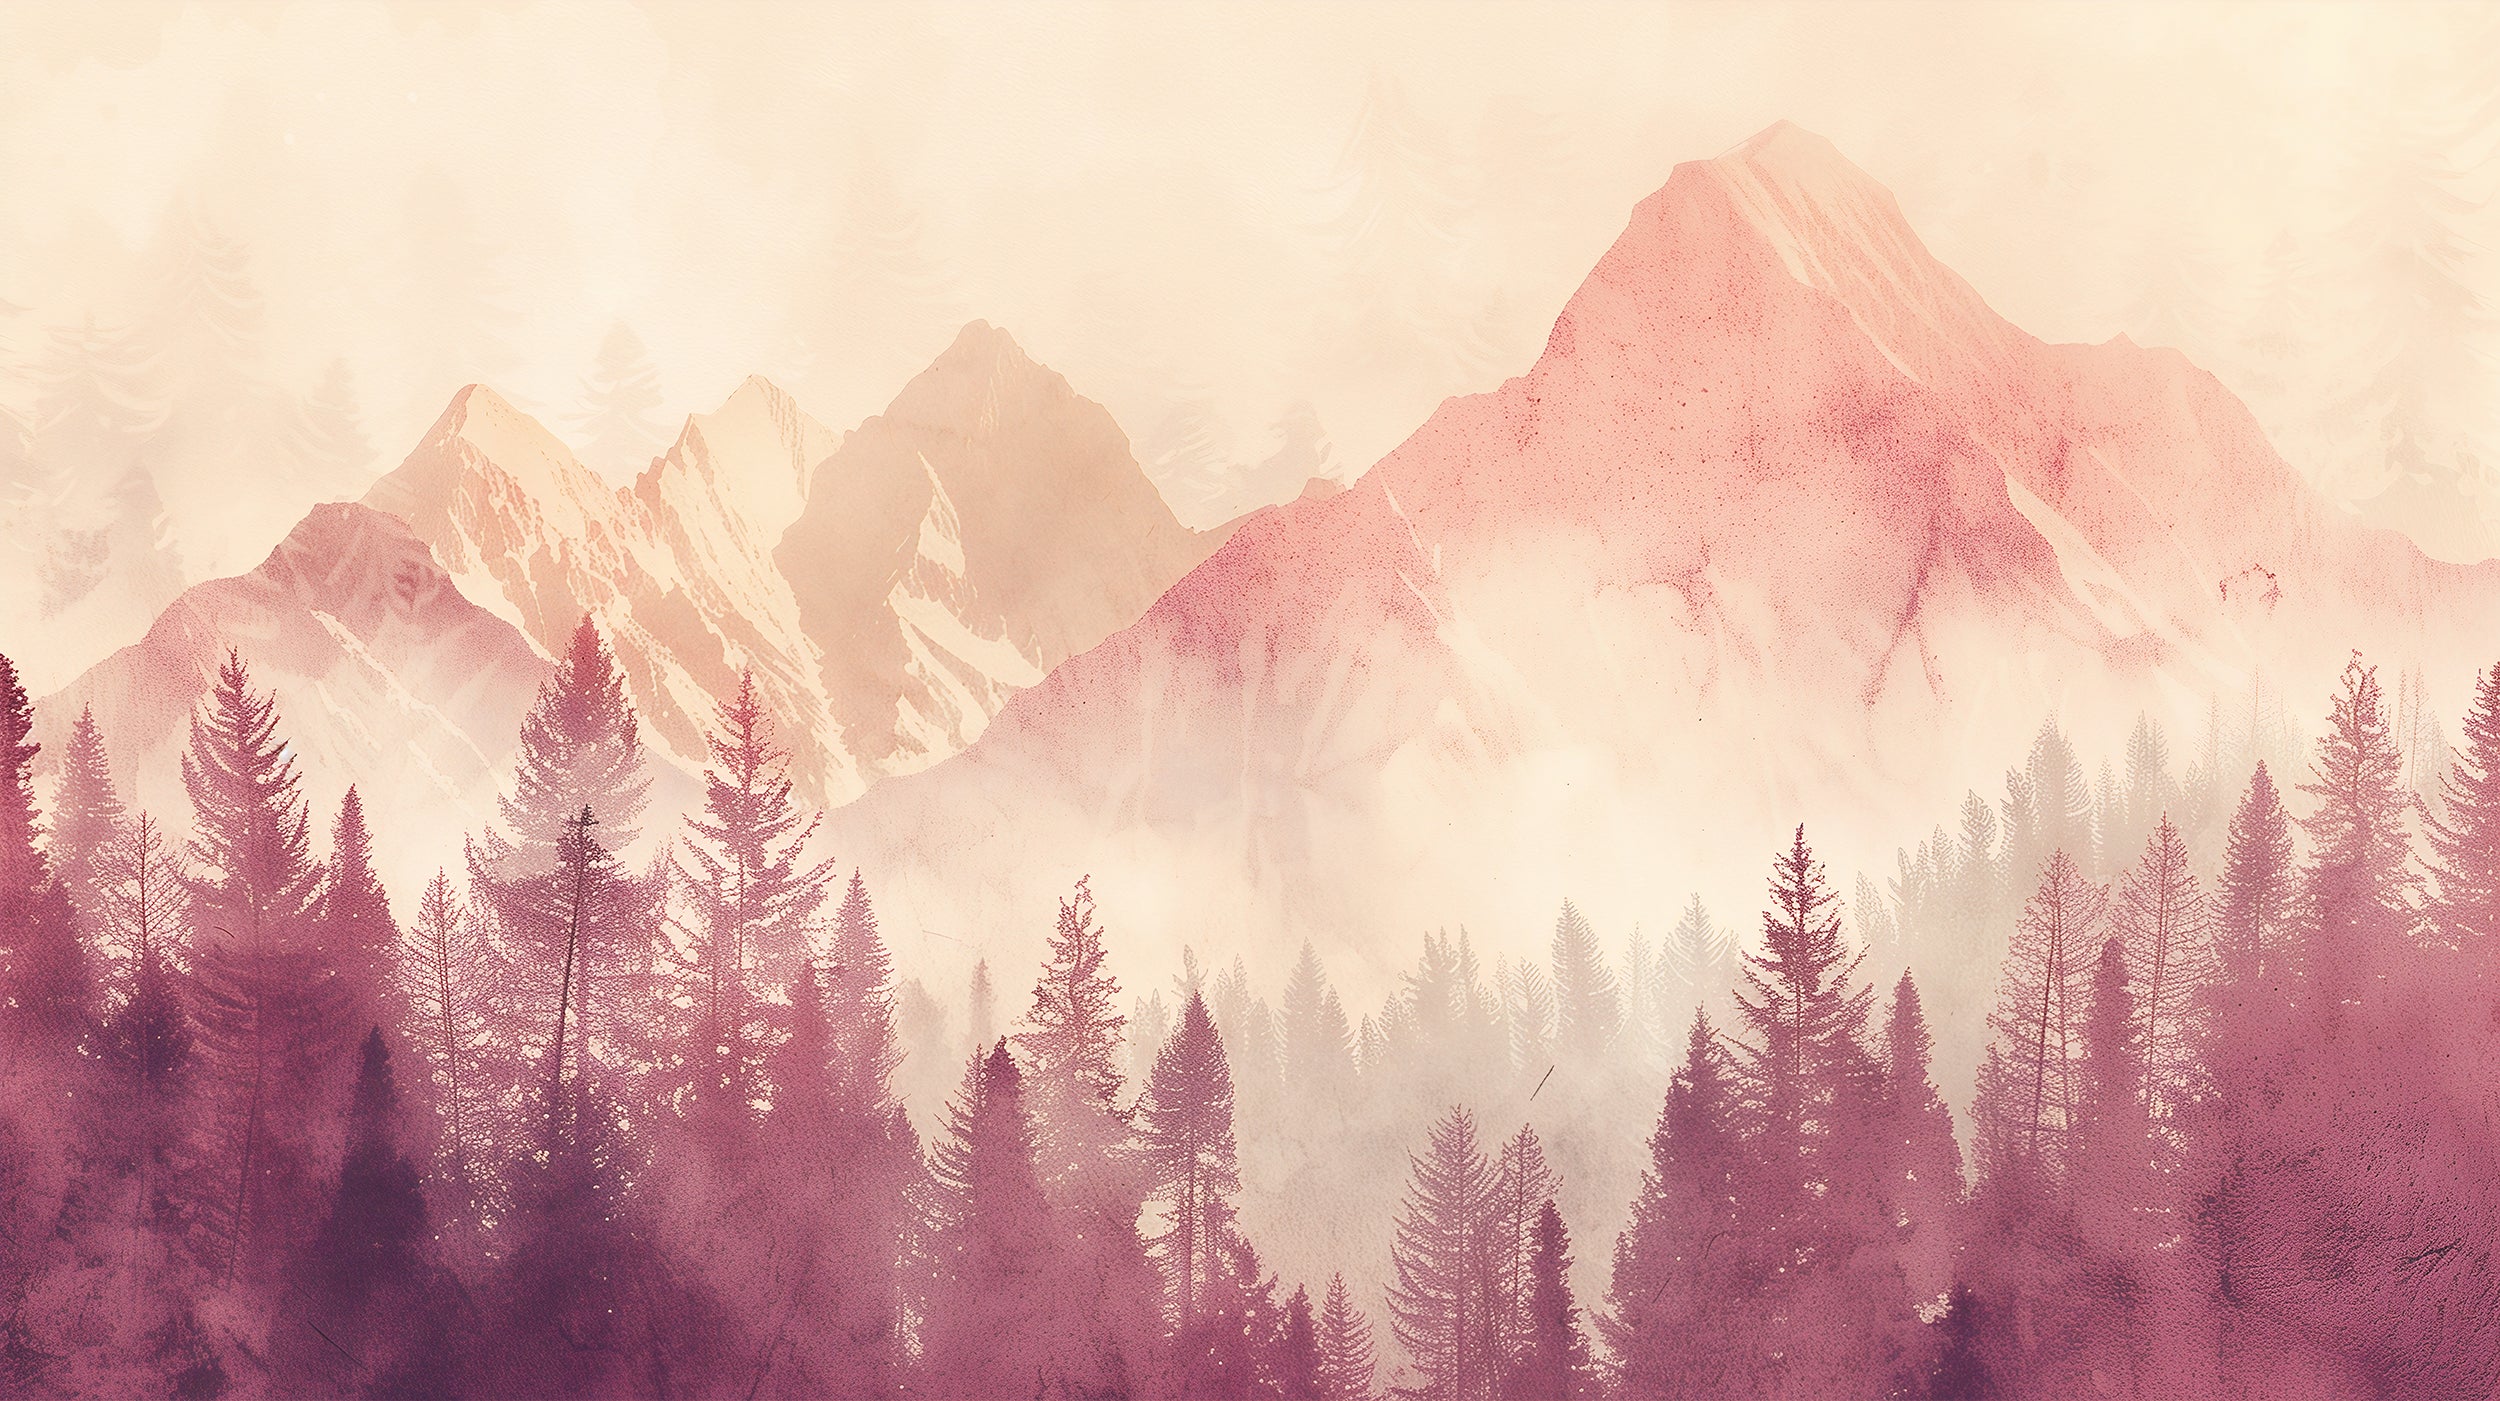 Peel and stick removable pink monochrome decor Pink mountain and forest wallpaper